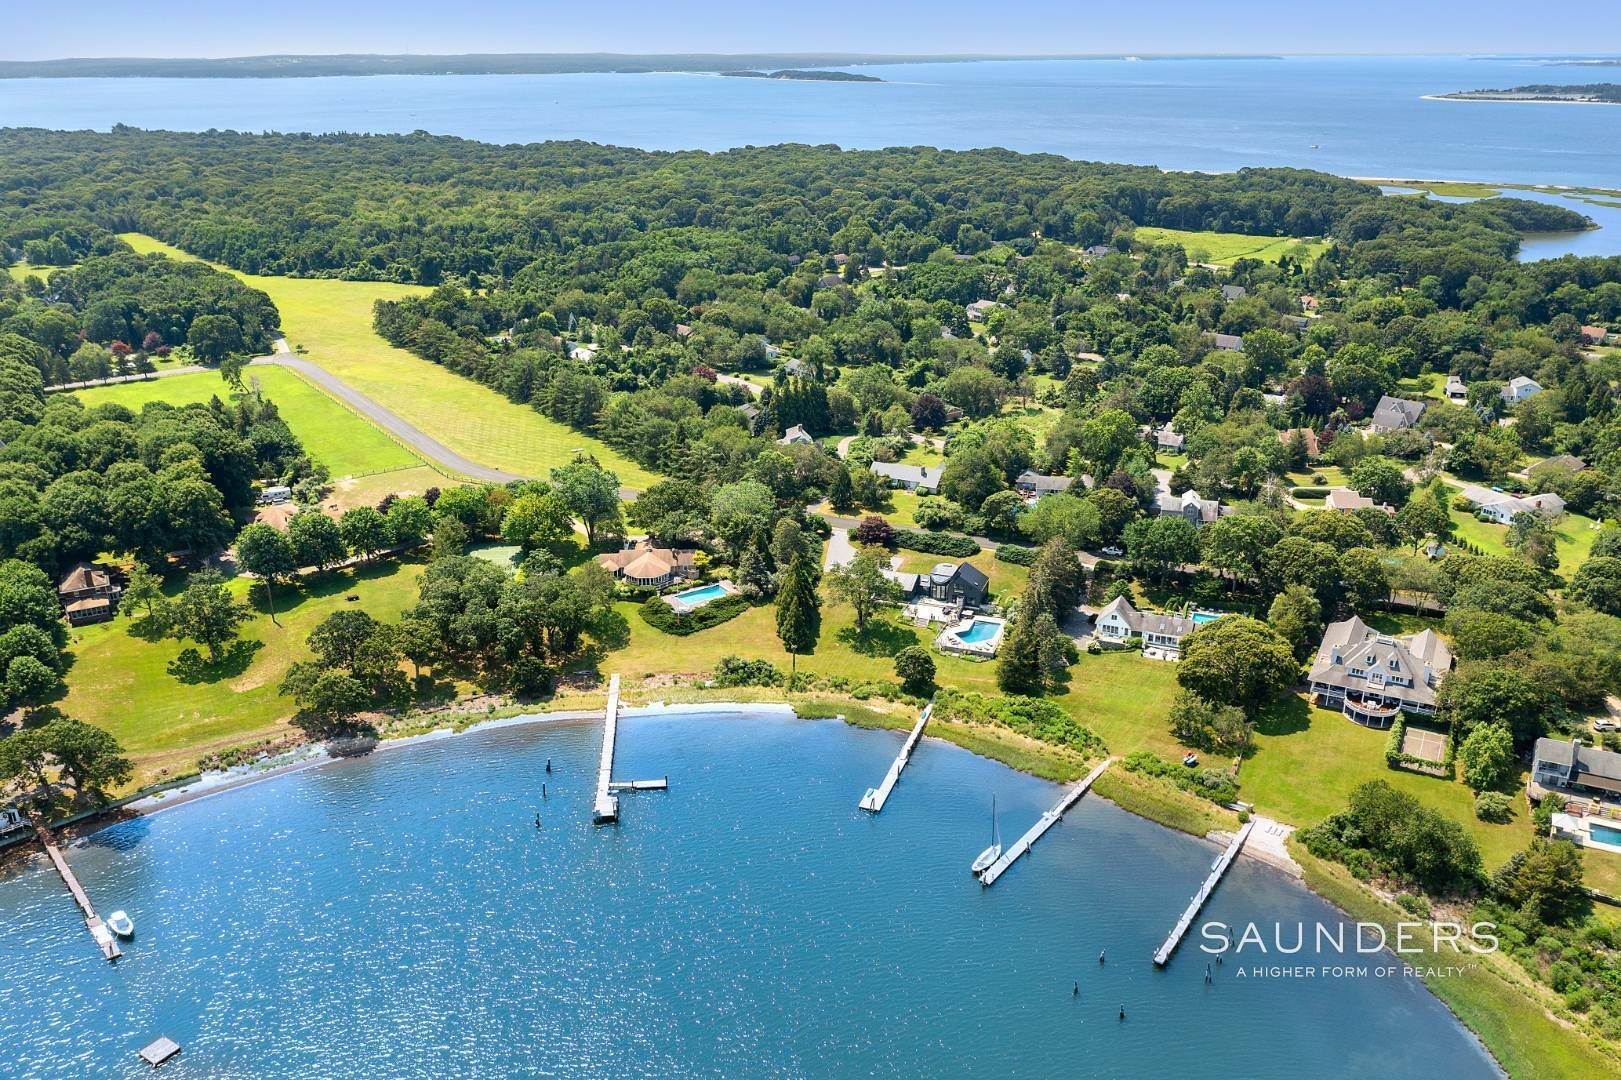 Single Family Homes for Sale at Estate Section Compound With Deep Water Dock, Sandy Beach, Pool 58 Westmoreland Drive, Shelter Island, NY 11964